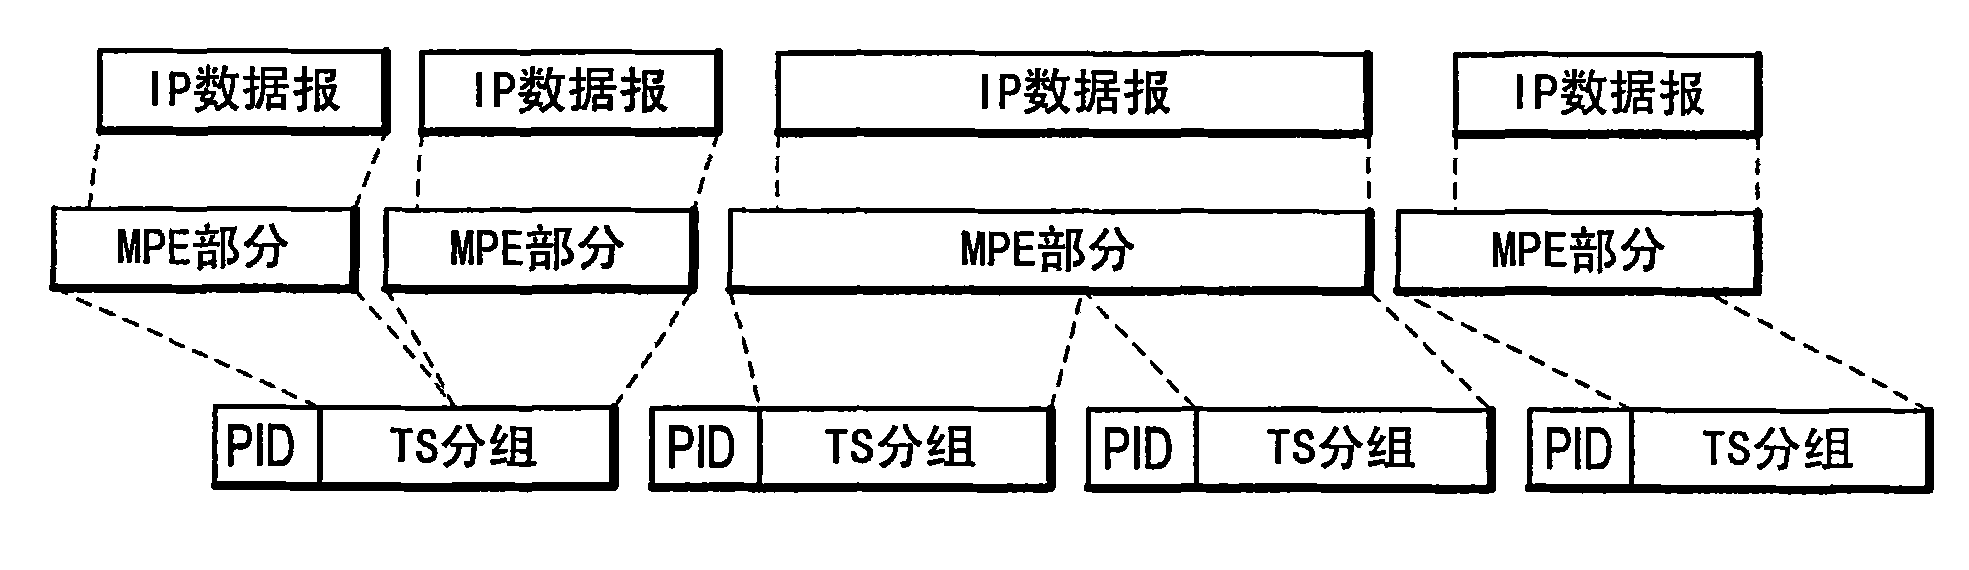 Method and apparatus for receiving multiple simultaneous stream bursts with limited DVB receiver memory